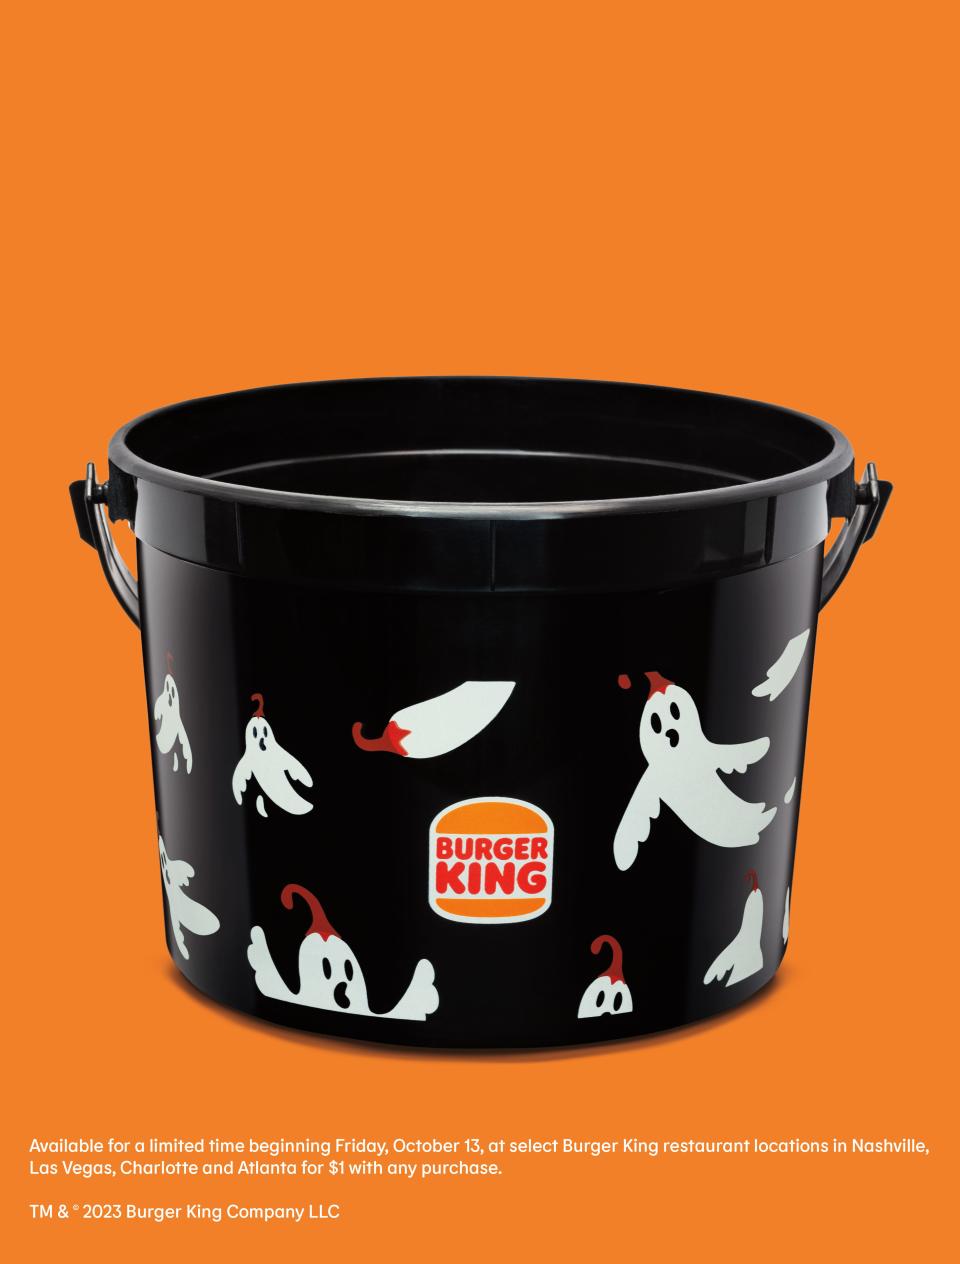 Burger King is releasing a Trick-or-Heat bucket at participating metropolitan locations.